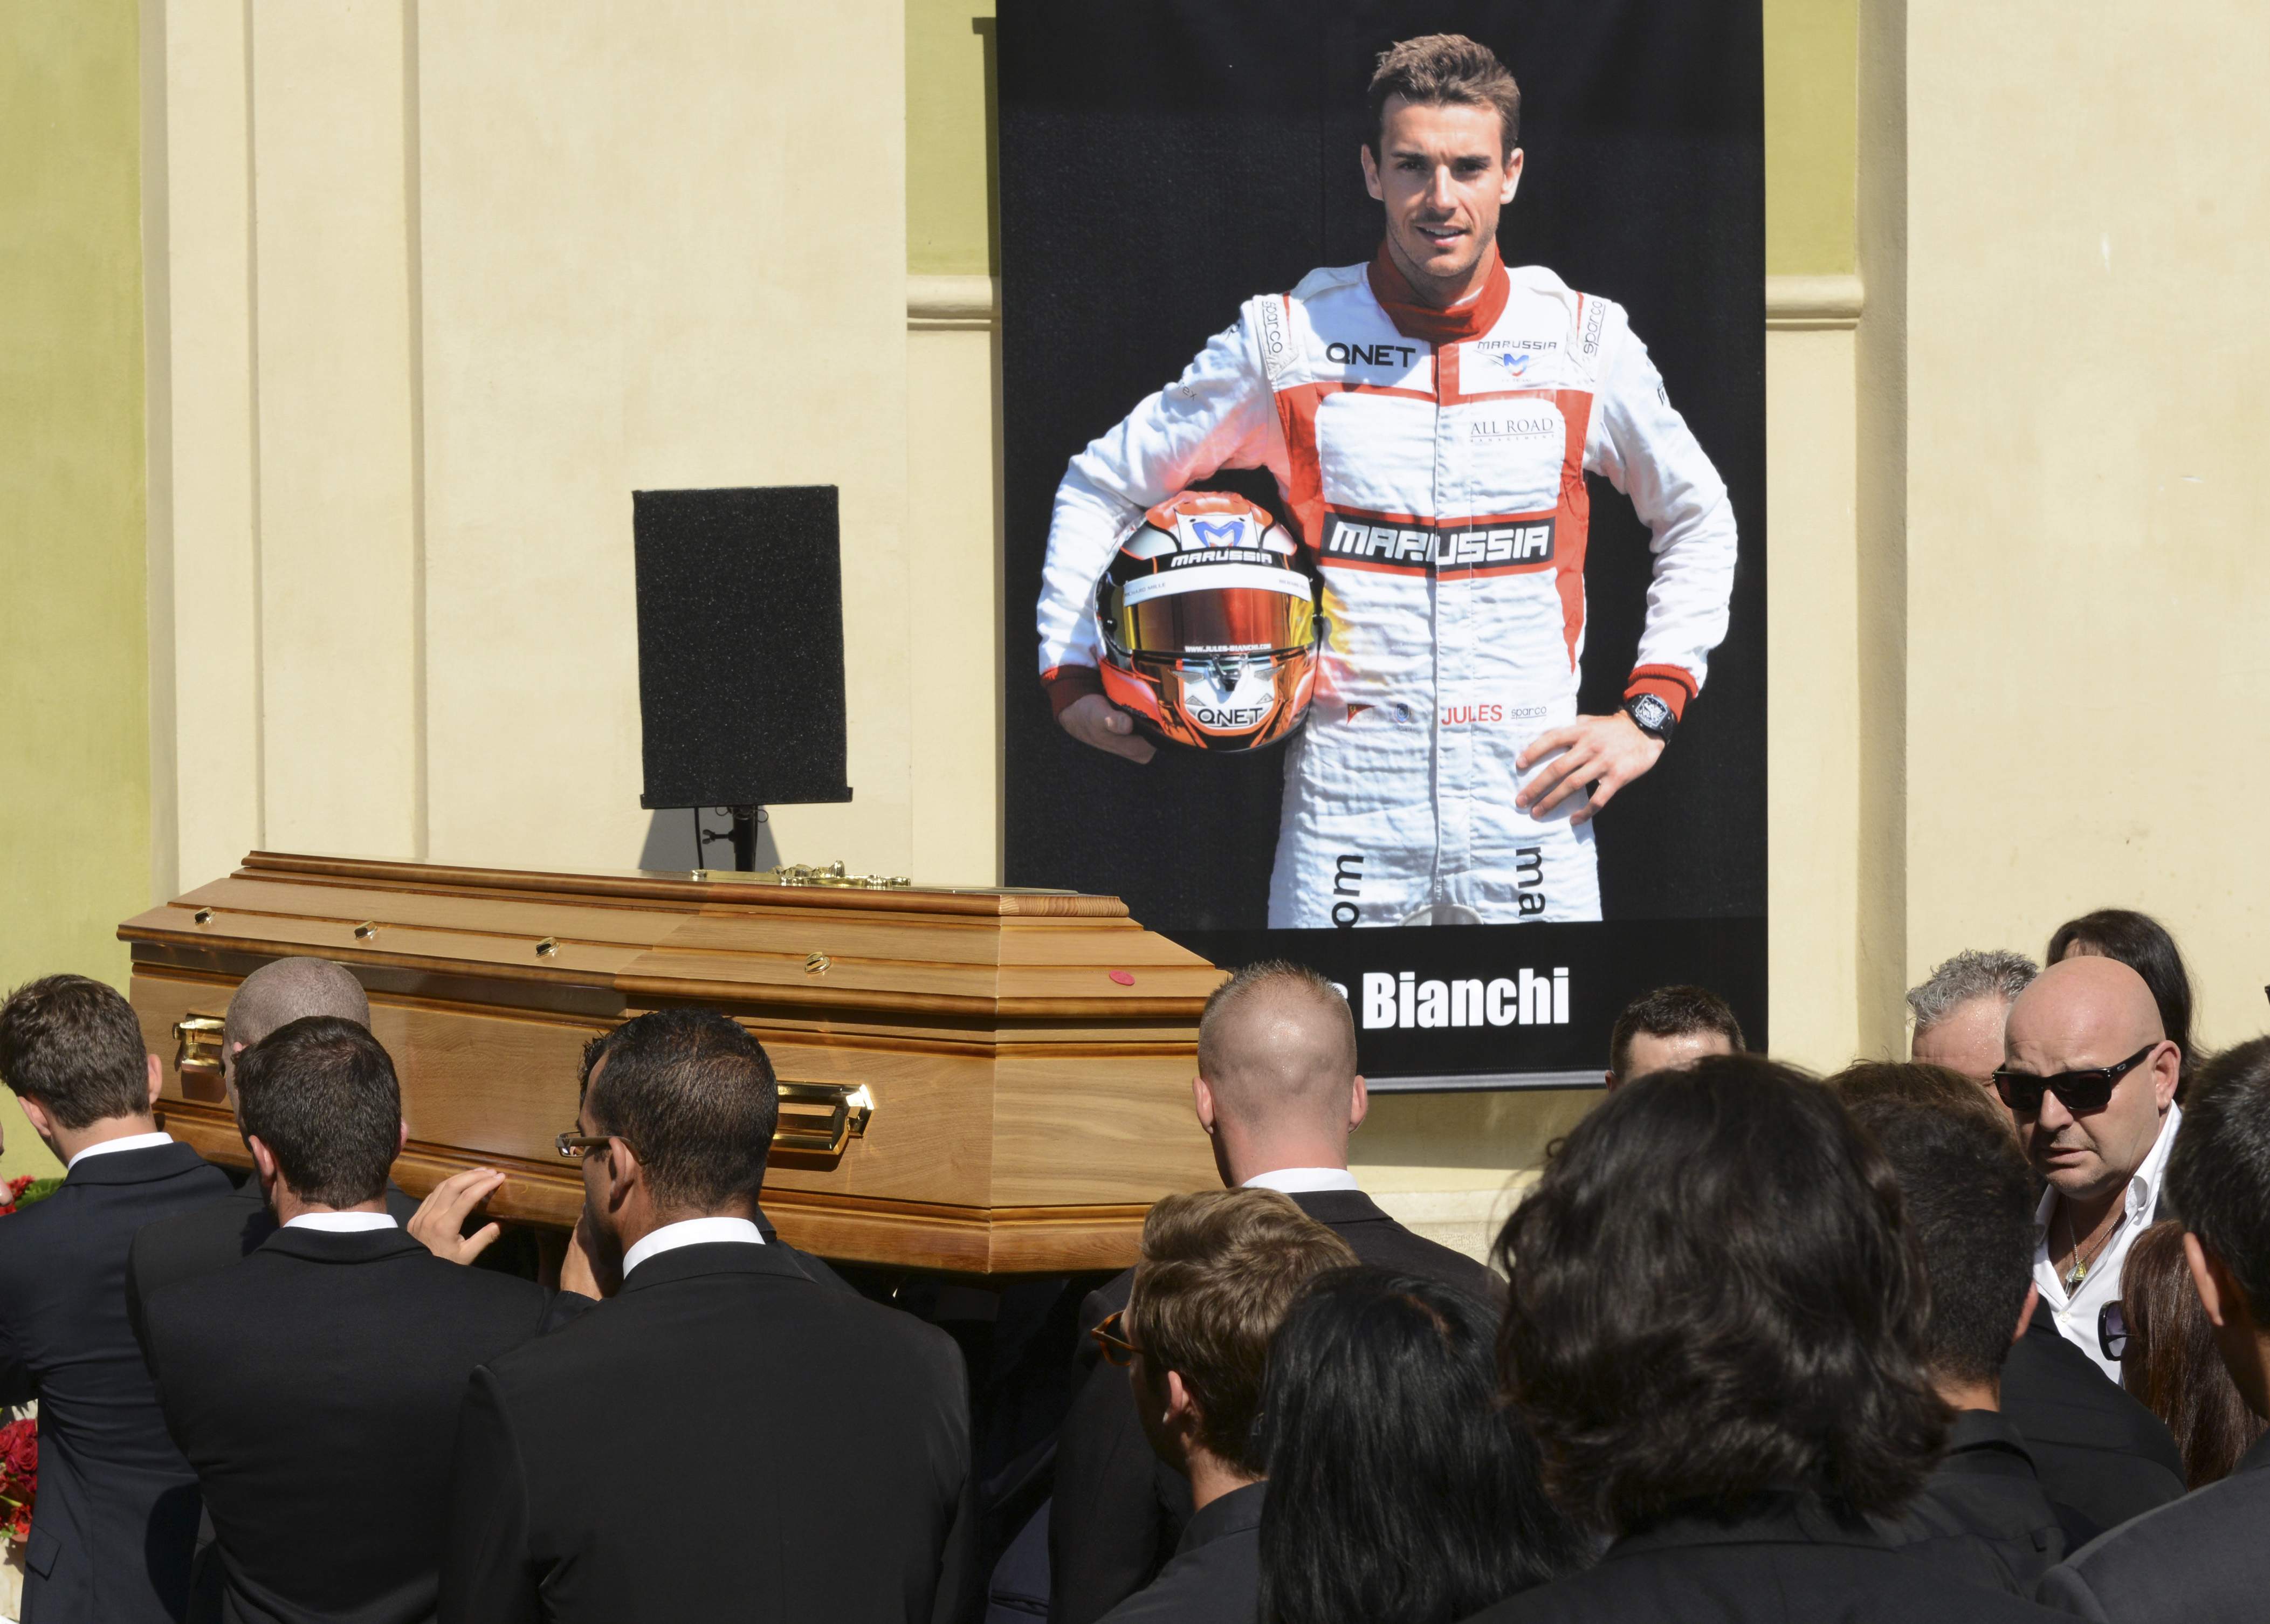 The sport of Formula One was thrown into sharp focus earlier this week at the death of one of its most promising young drivers. Photo: Reuters